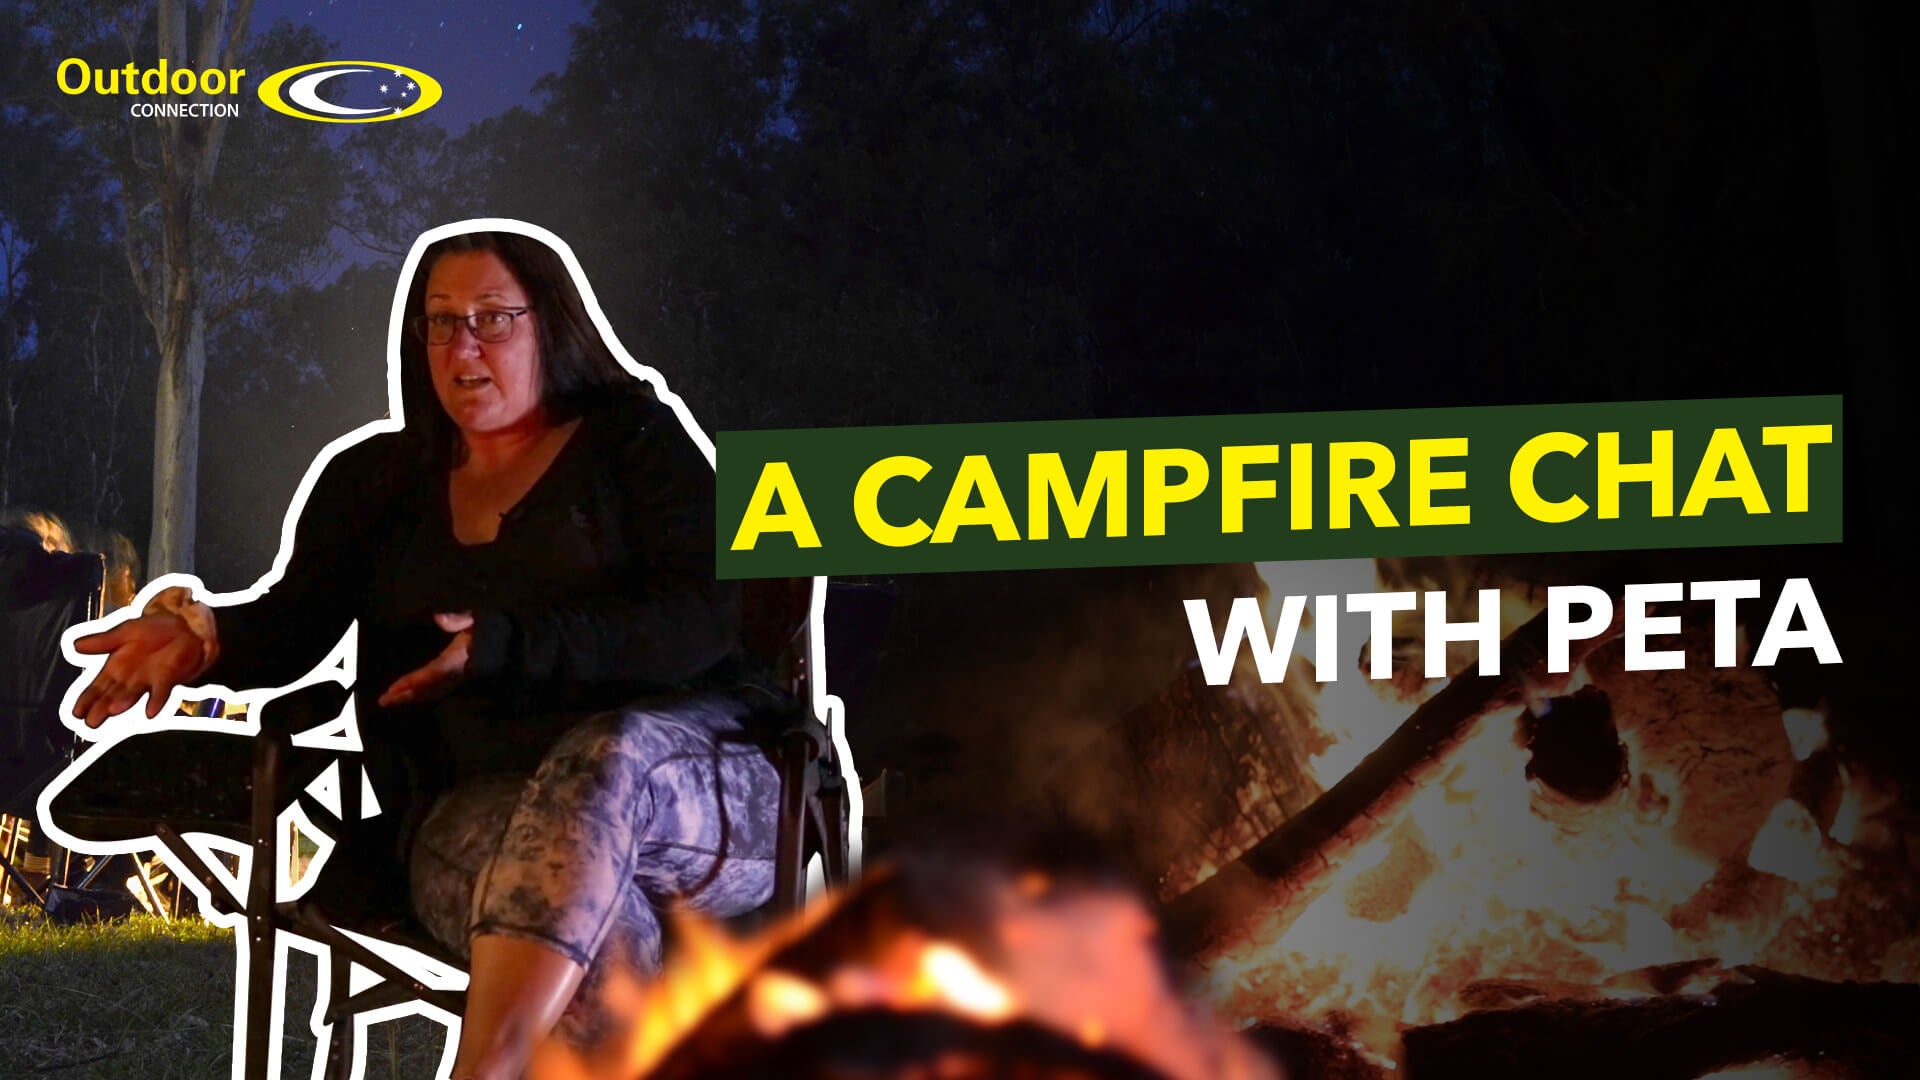 A Campfire Chat With Peta